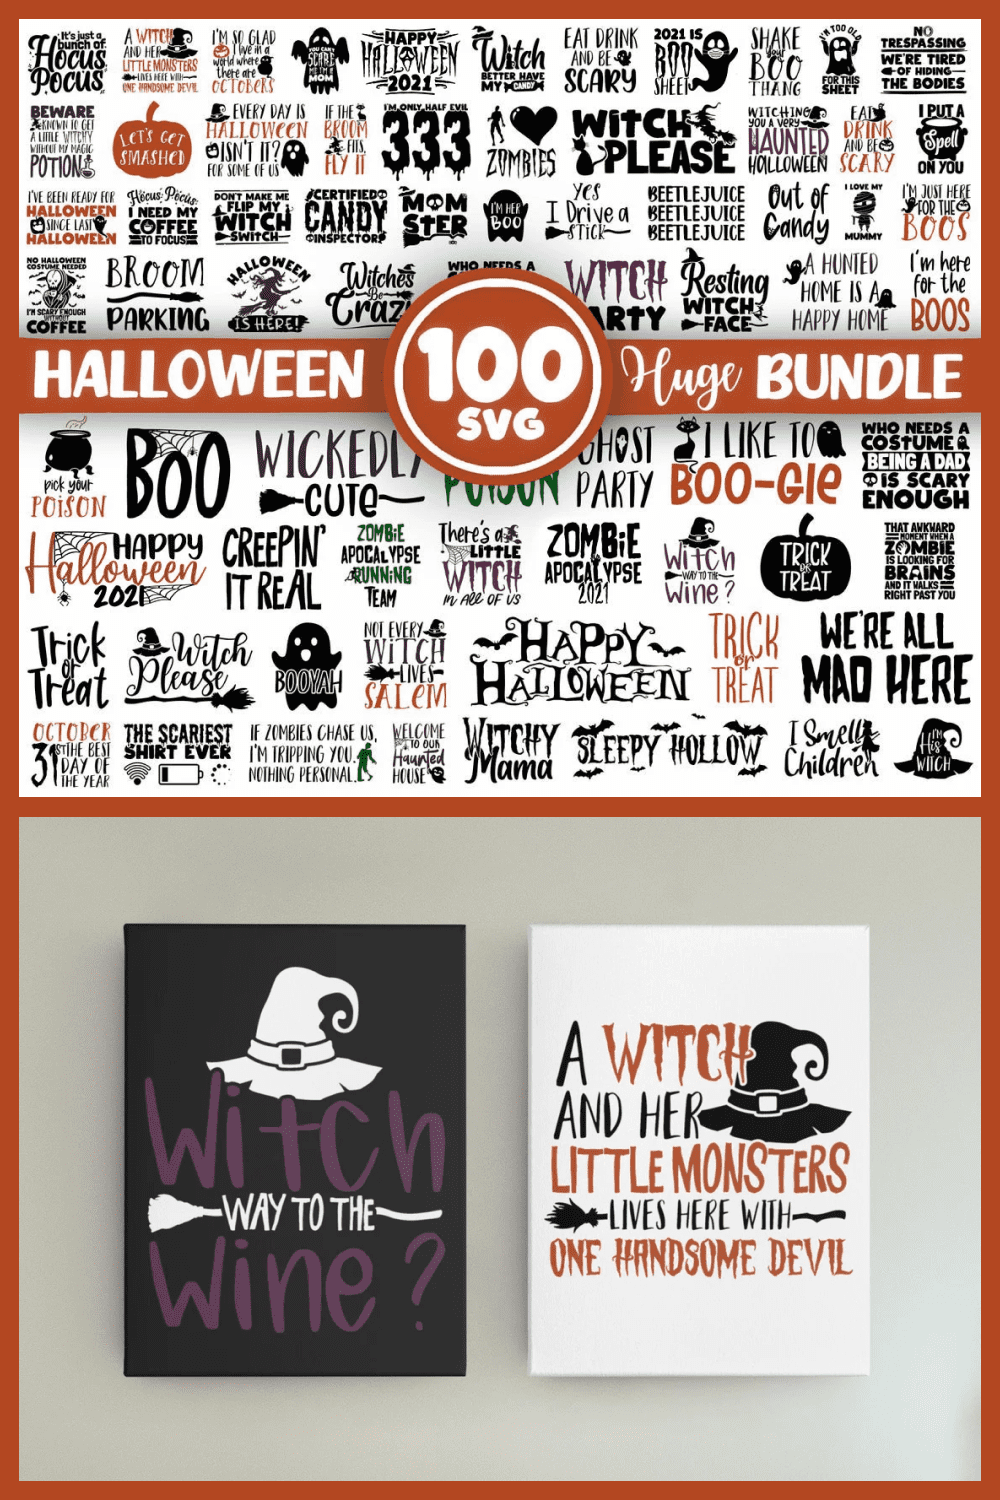 Great font for Halloween.